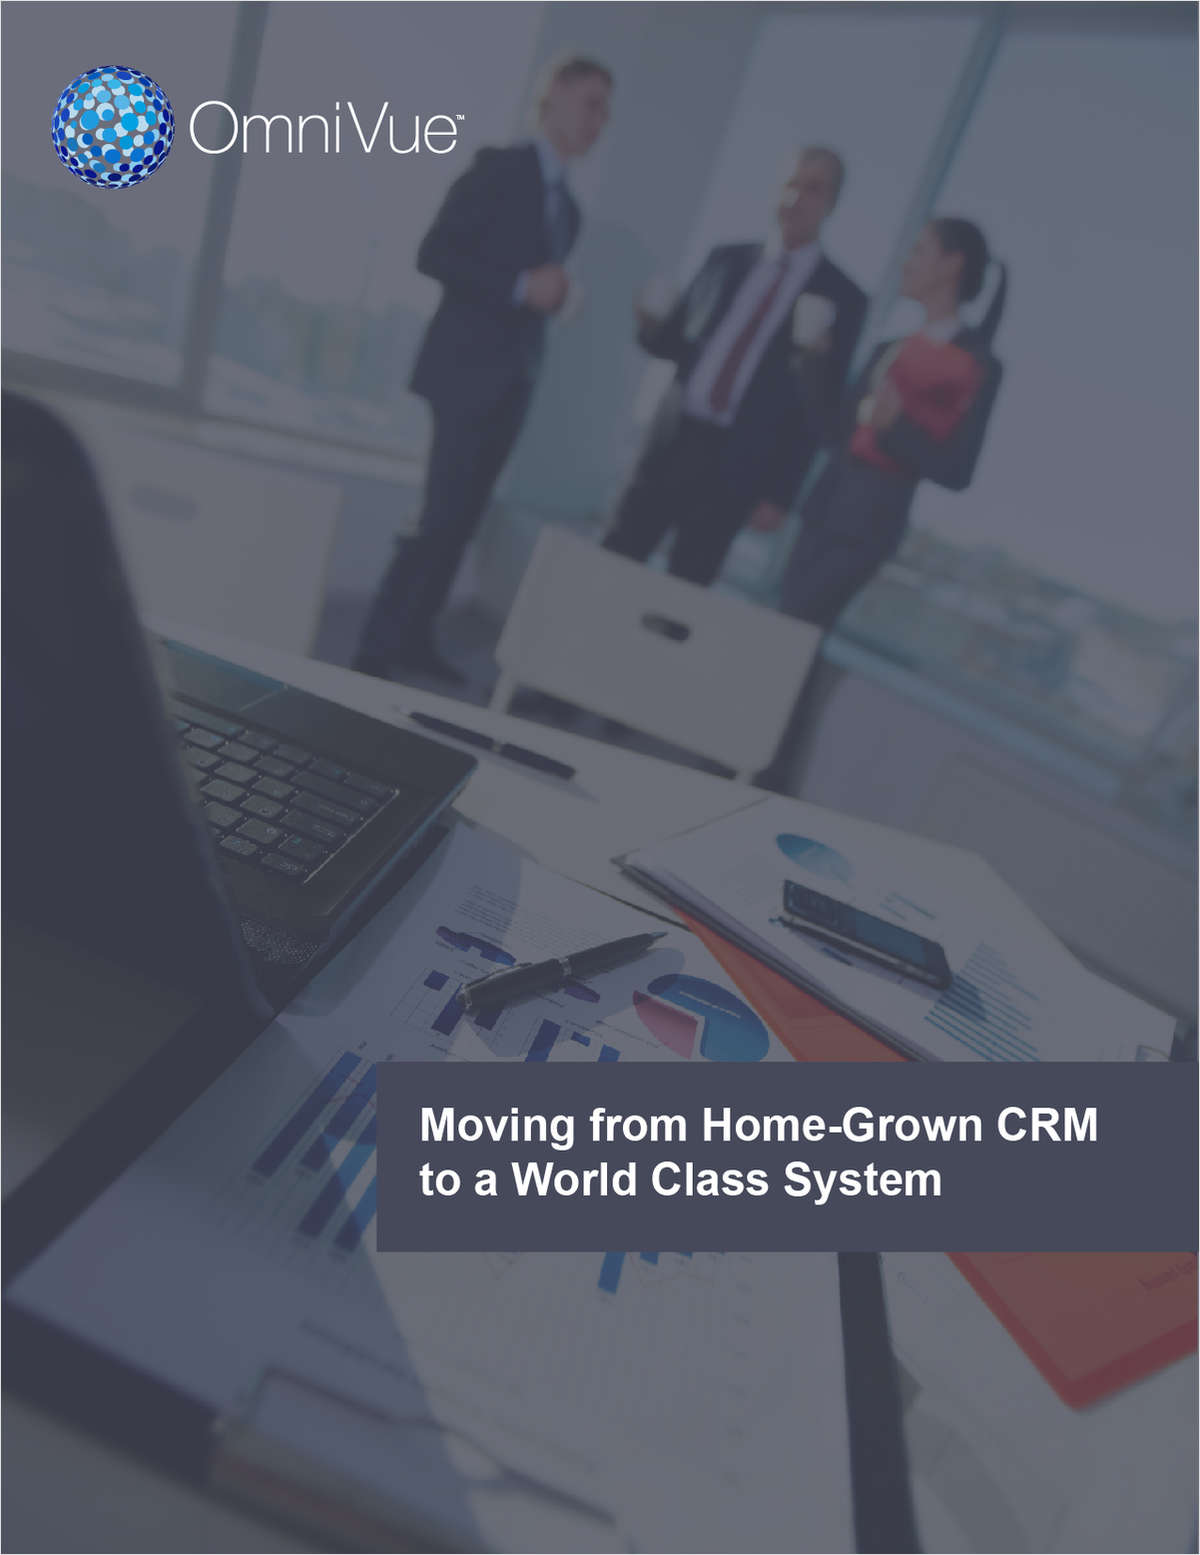 Why install a world-class CRM system?